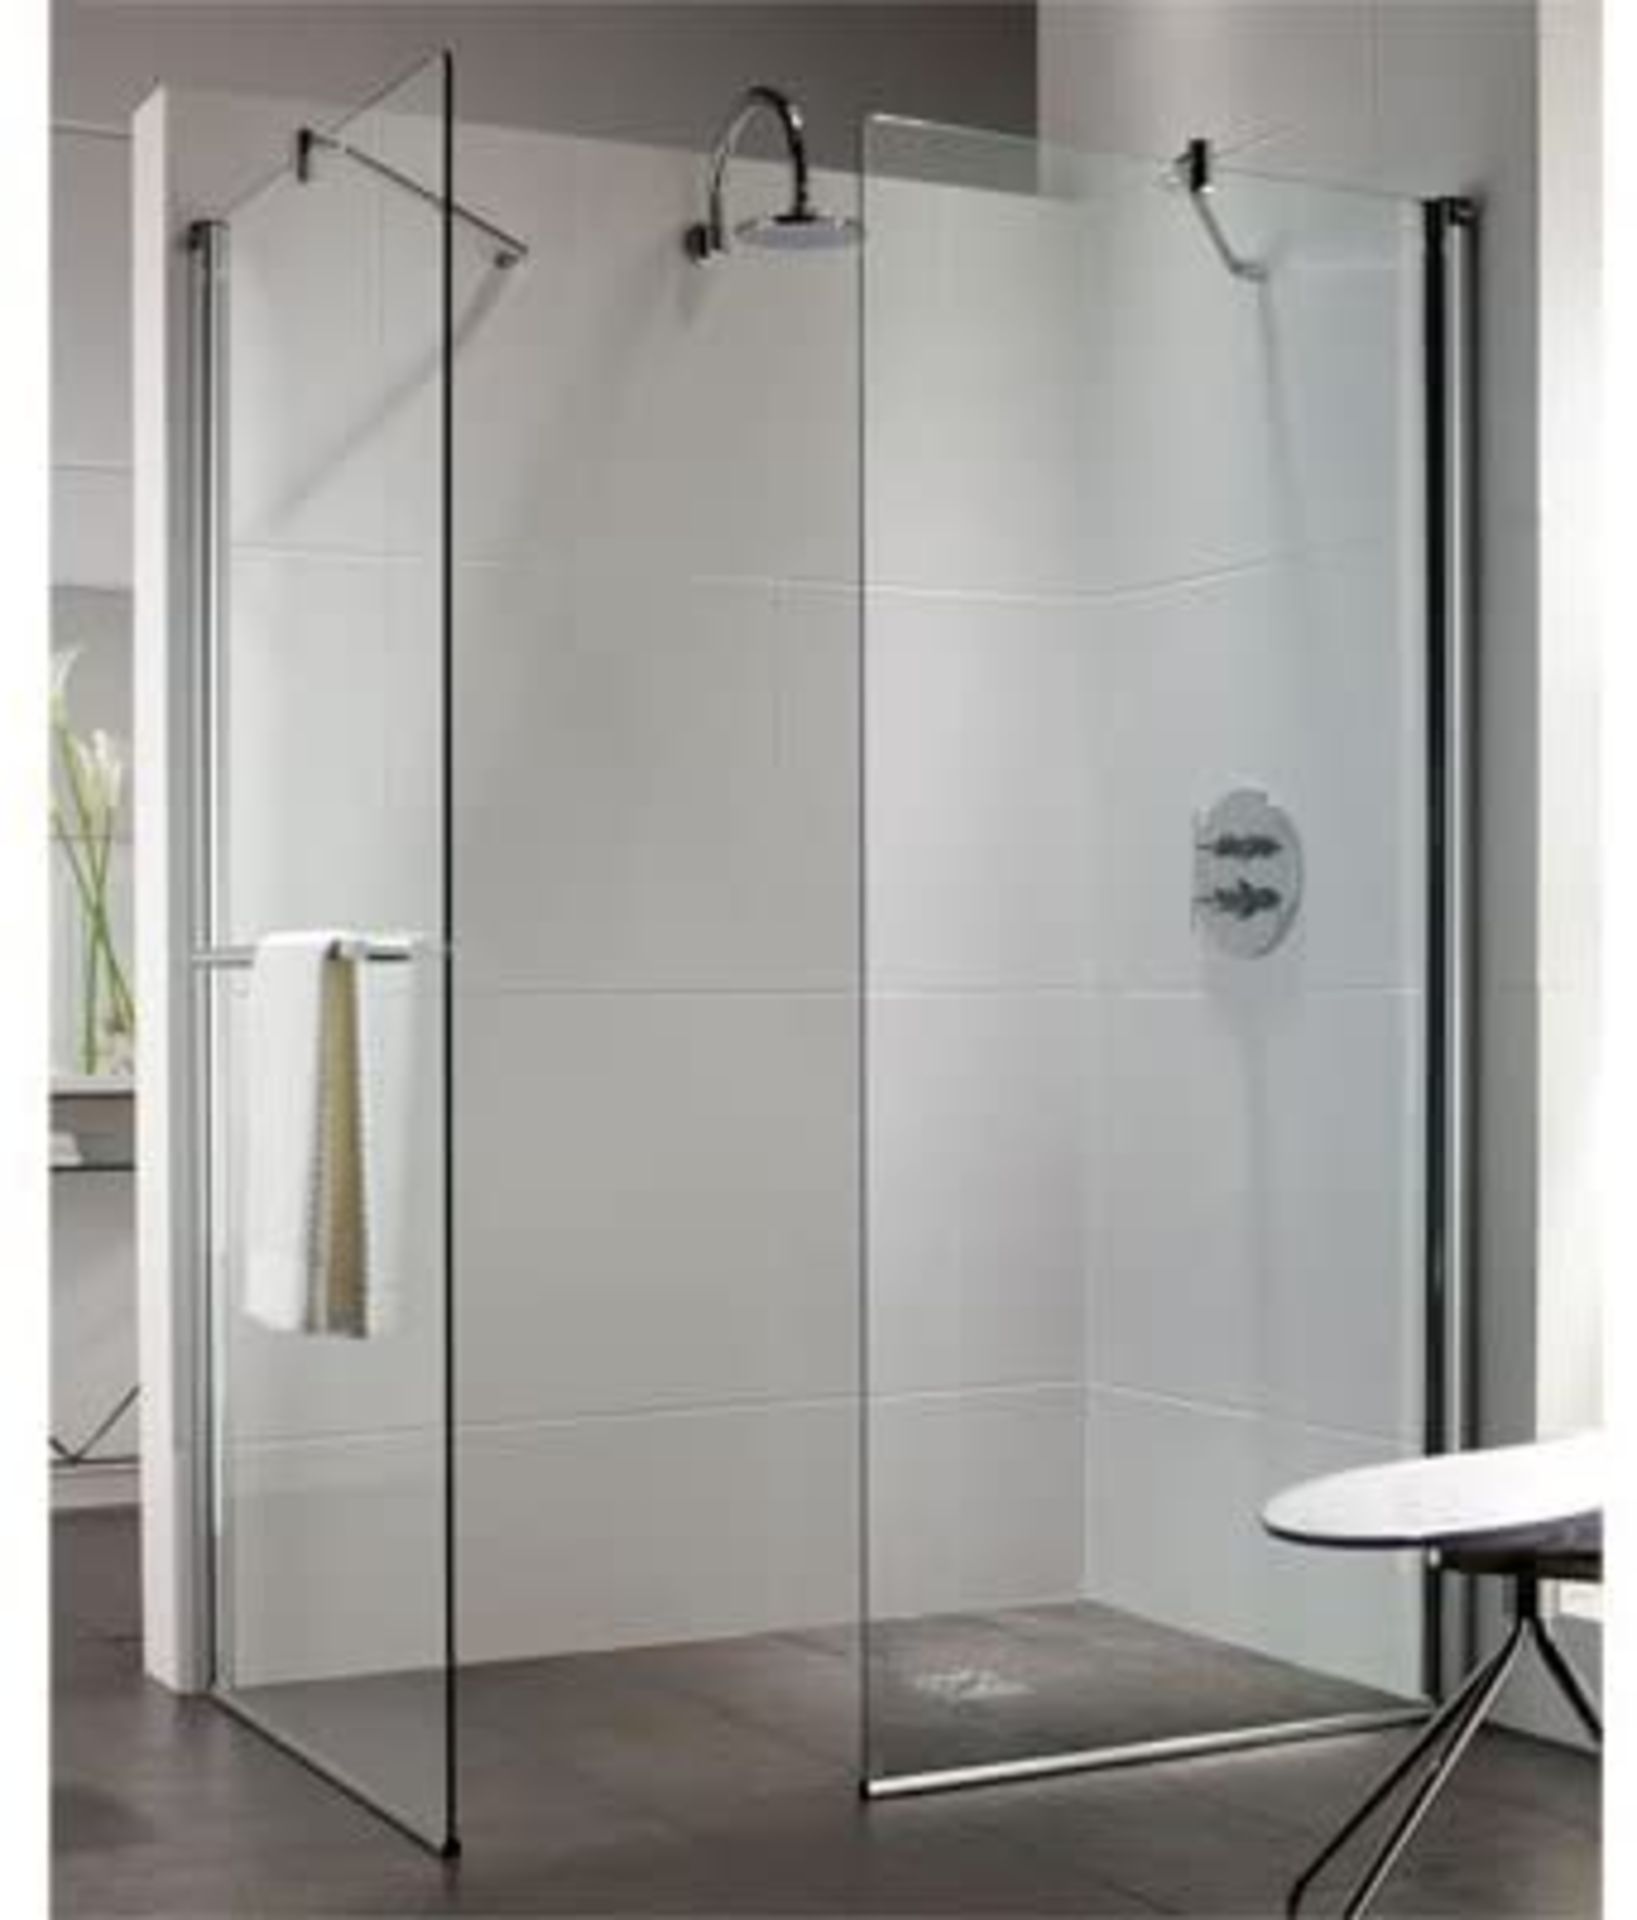 NEW Twyfords 1100x800mm Walk In Shower Enclosure. Hydr8 Walk In Flat Panel LEFT HAND Or R...